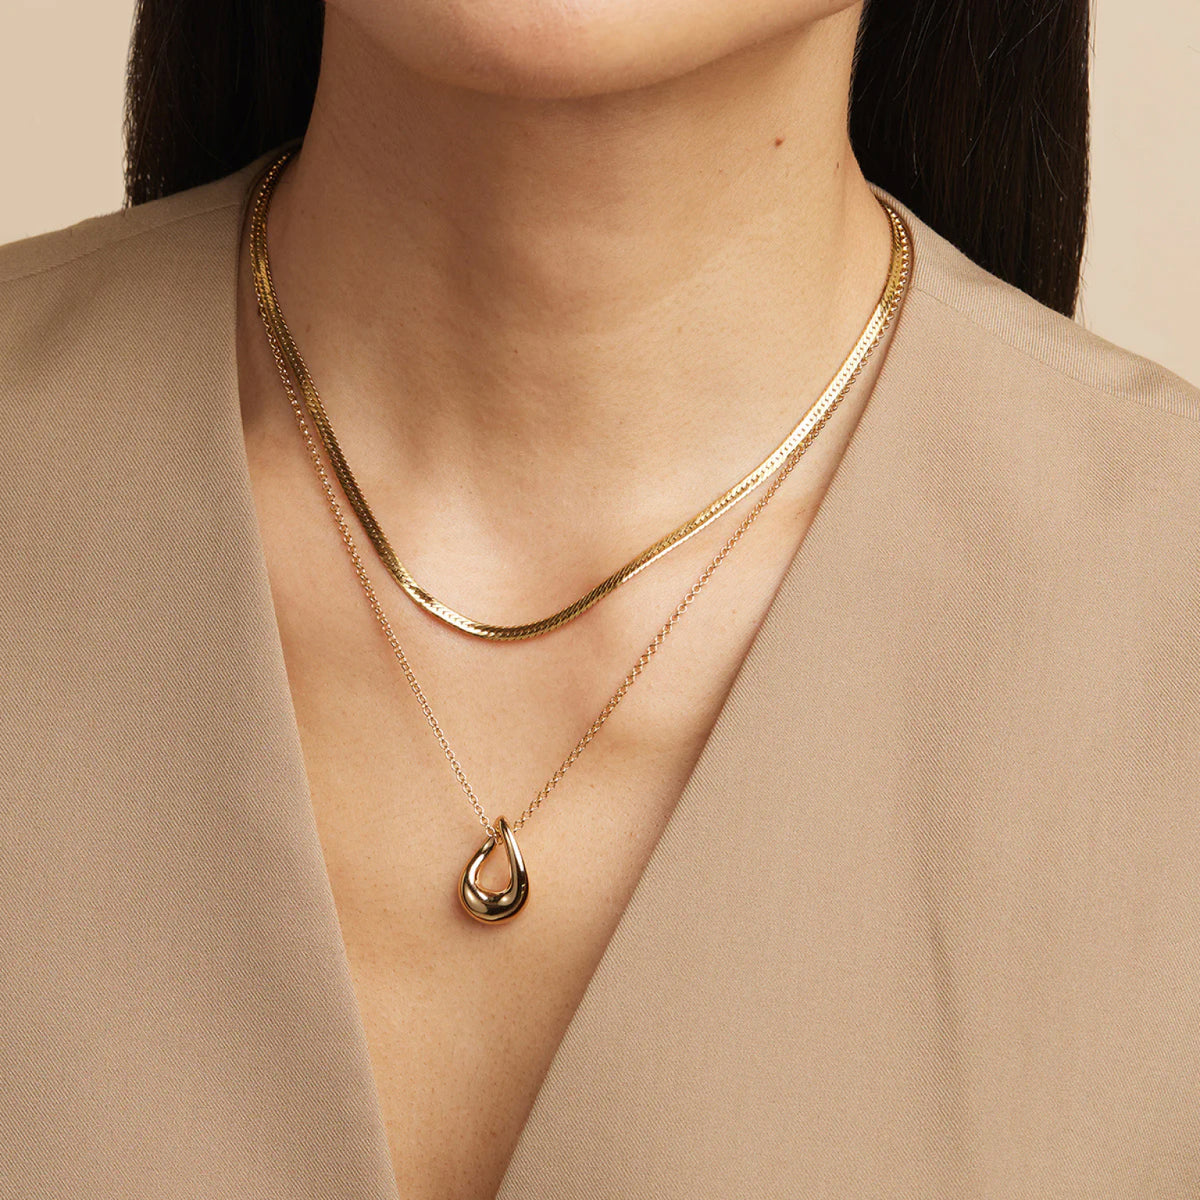 Woman wearing a minimalist silver snake chain with a silver necklace pendant for a simple yet elegant look.